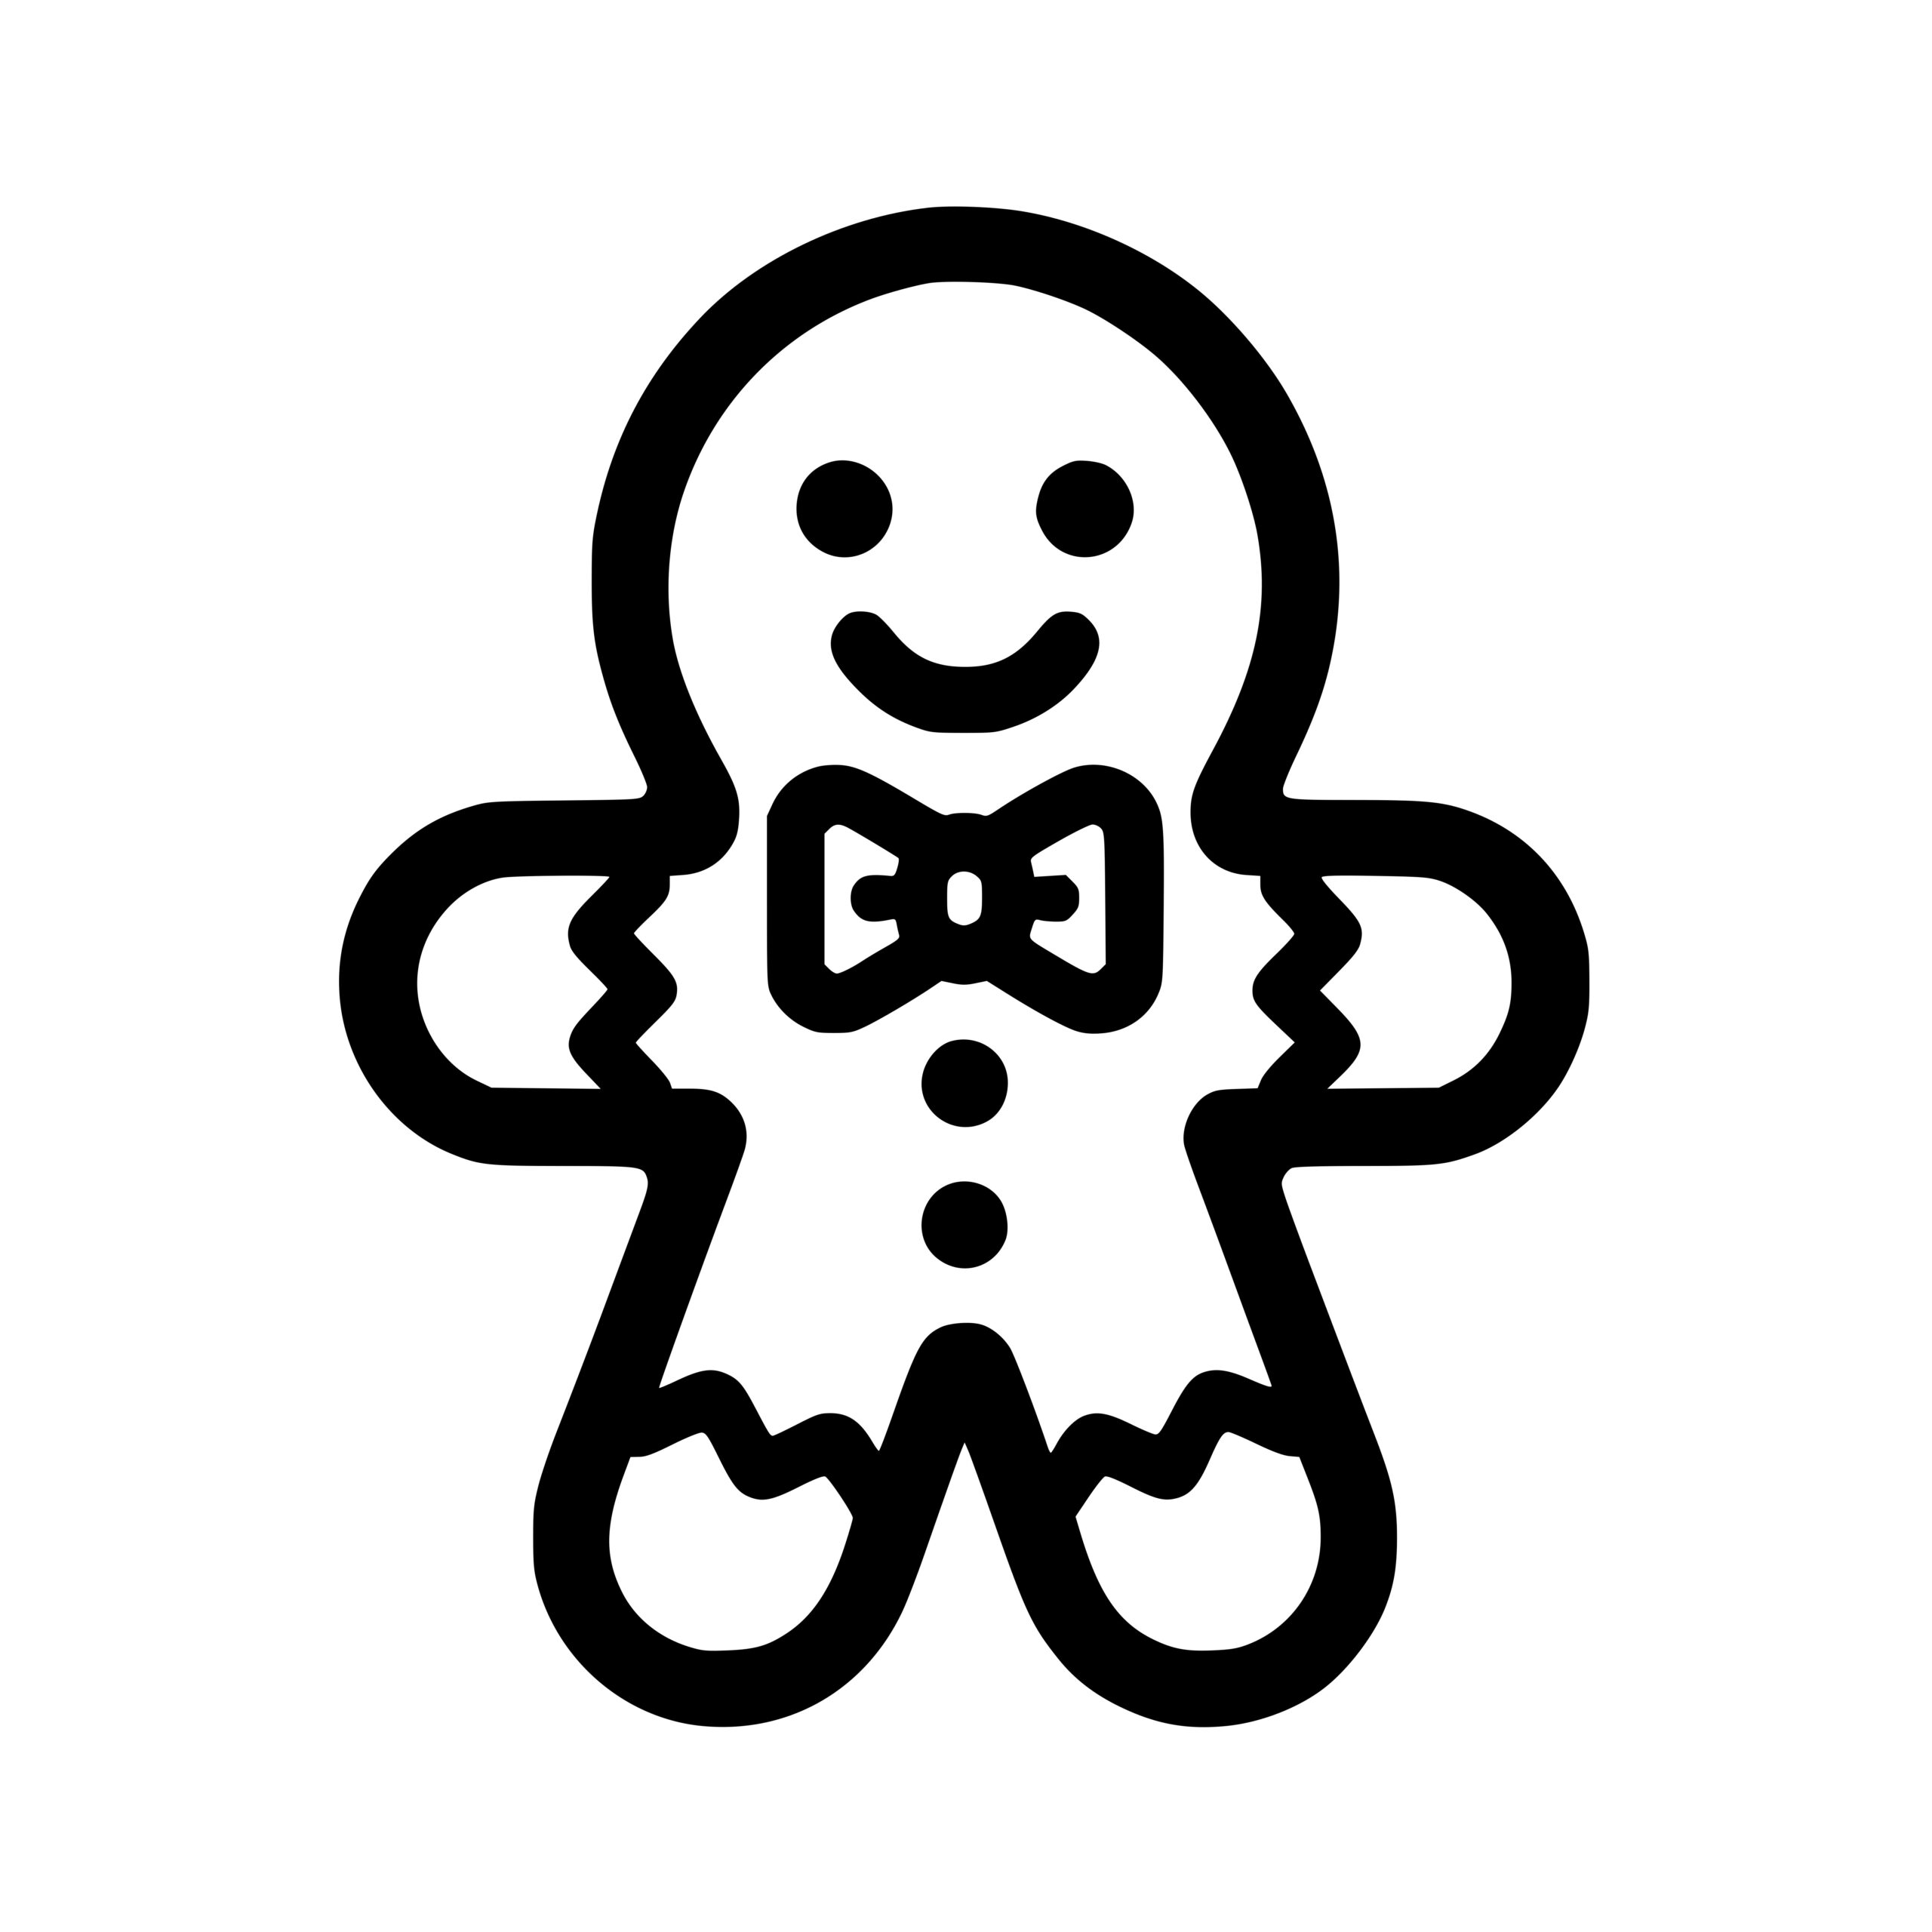 Instant Download SVG File: Gingerbread Man Elegance with Bow Tie